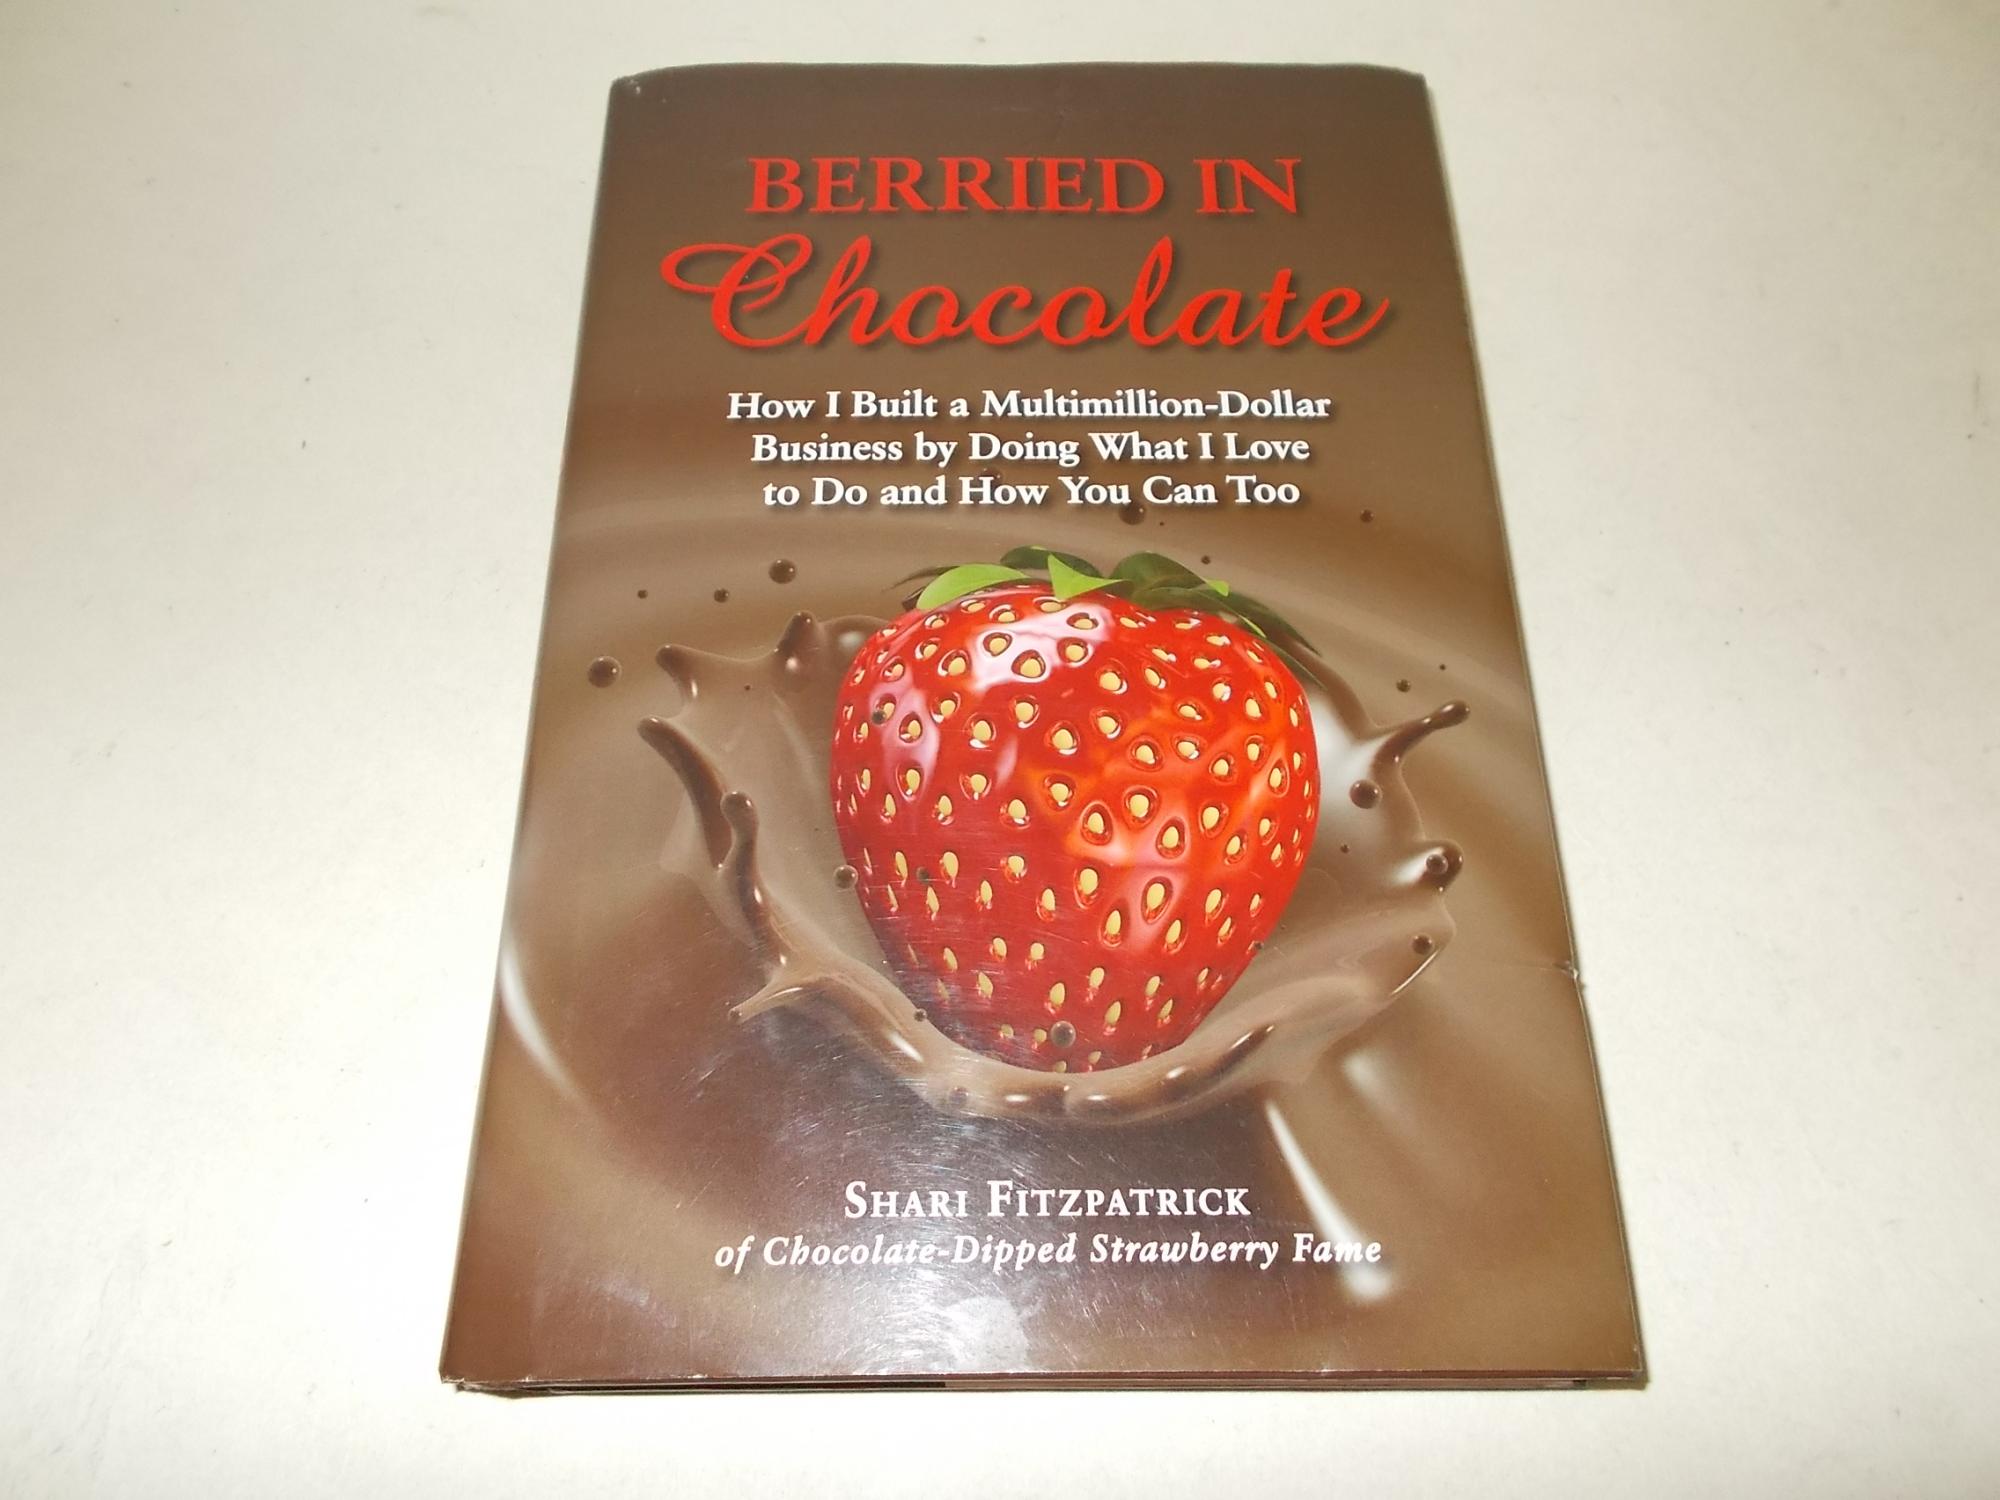 Berried in Chocolate: How I Built a Multimillion-Dollar Business by Doing What I Love to Do and How You Can Too - Shari Fitzpatrick